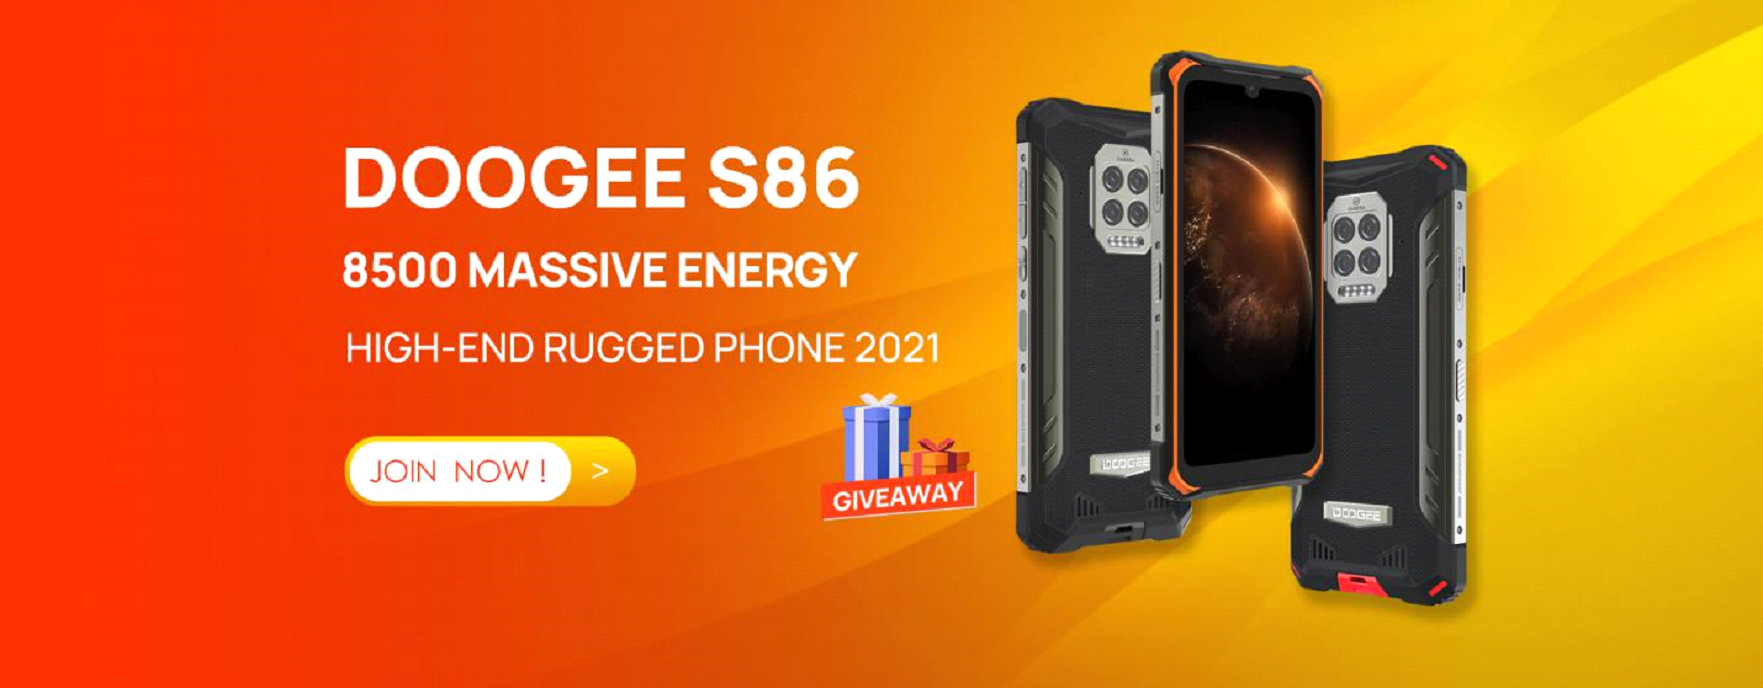 DOOGEE S86 - a new rugged smartphone with 8500 mAh and 6 GB RAM ⋆ 1